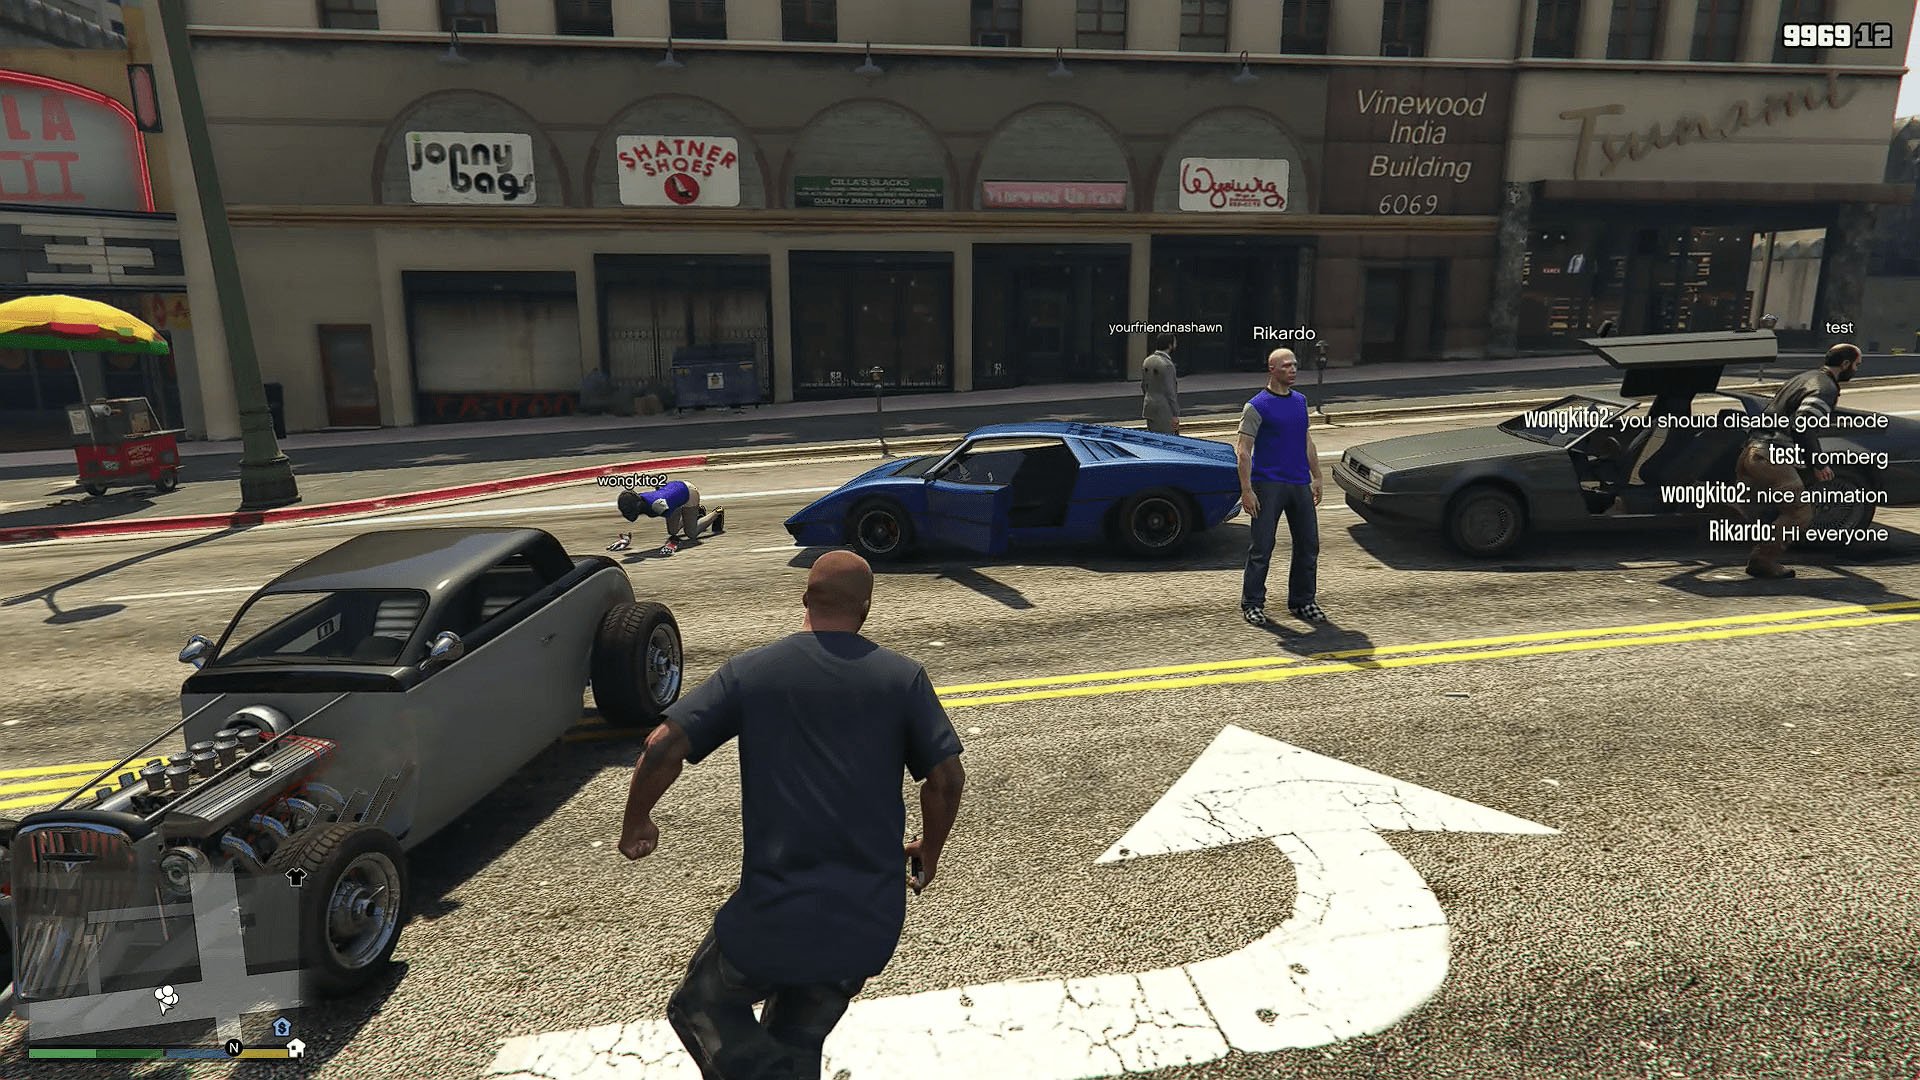 GTA 5 mod brings co-op multiplayer to the game's story mode